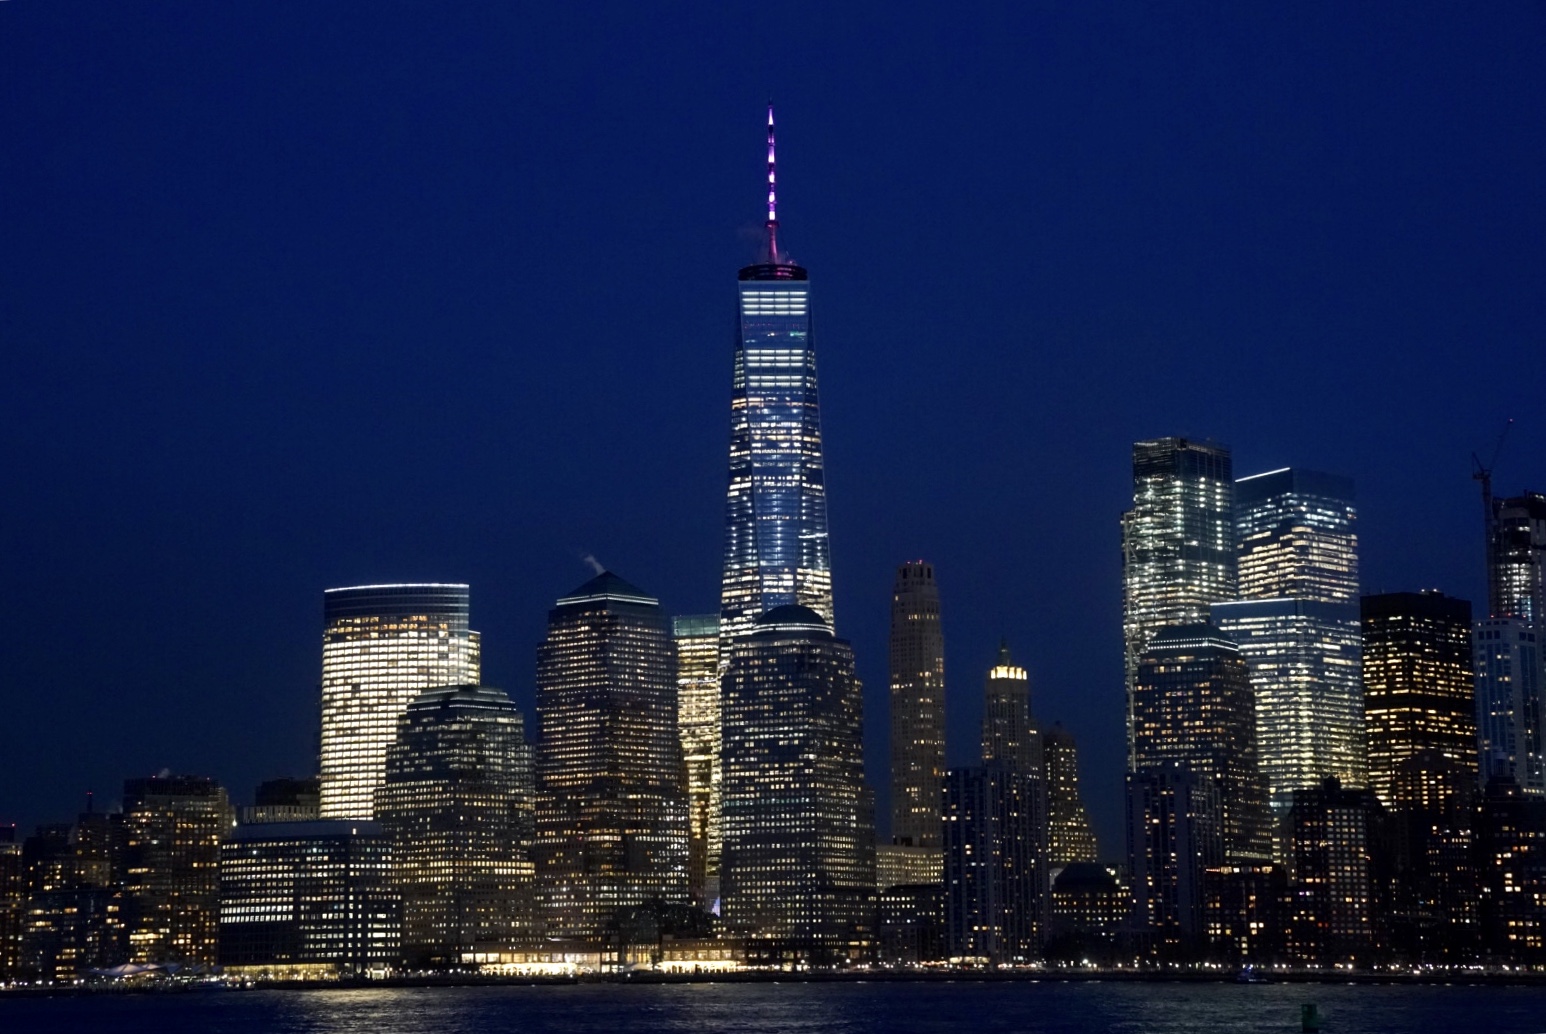 they lit up the WTC tower, this image is a link to an online news site